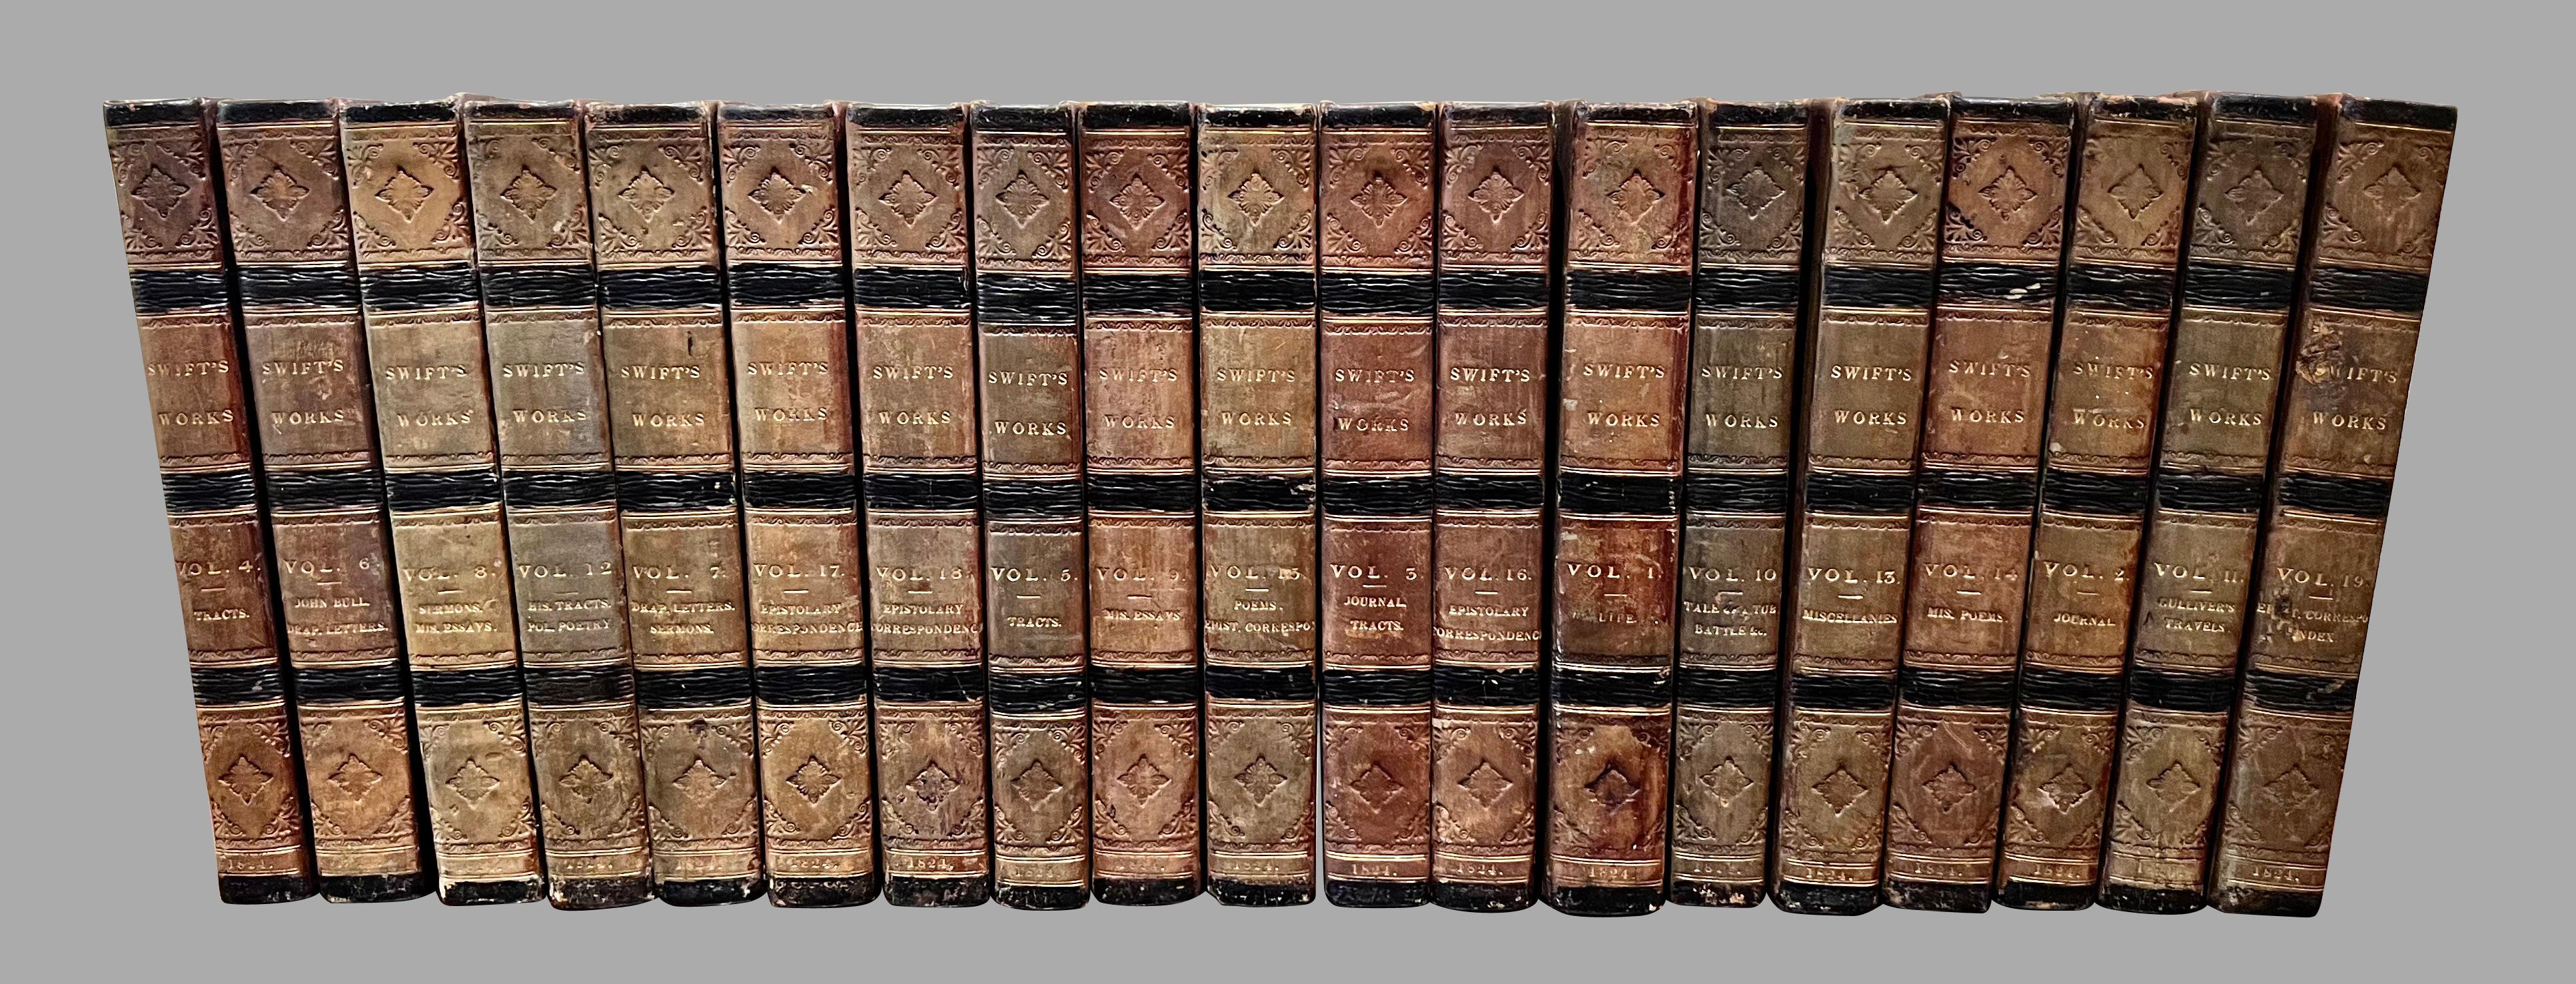 The works of Jonathan Swift (1667-1745)  second edition complete in 19 leatherbound volumes published for Archibald Constable and Co. Edinburgh and Hurst, Robinson, and Co. London 1824. Swift was a famous Anglo-Irish essayist, writer, poet and